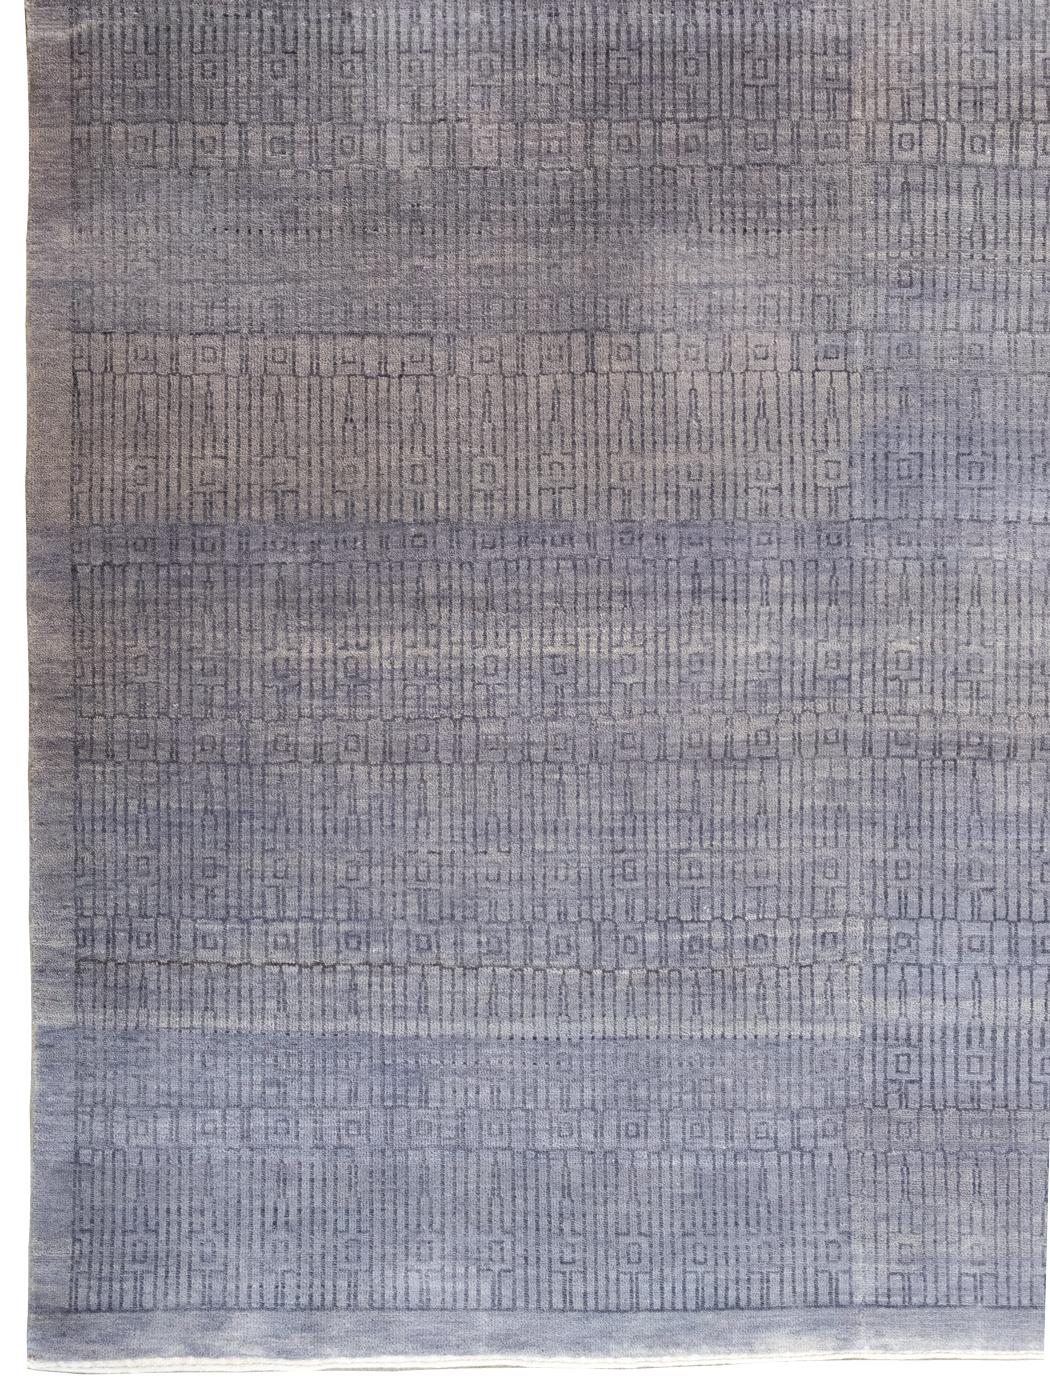 Orley Shabahang, Gray Modern Architectural Carpet, Wool, Hand-Knotted, 9' x 12' In New Condition For Sale In New York, NY